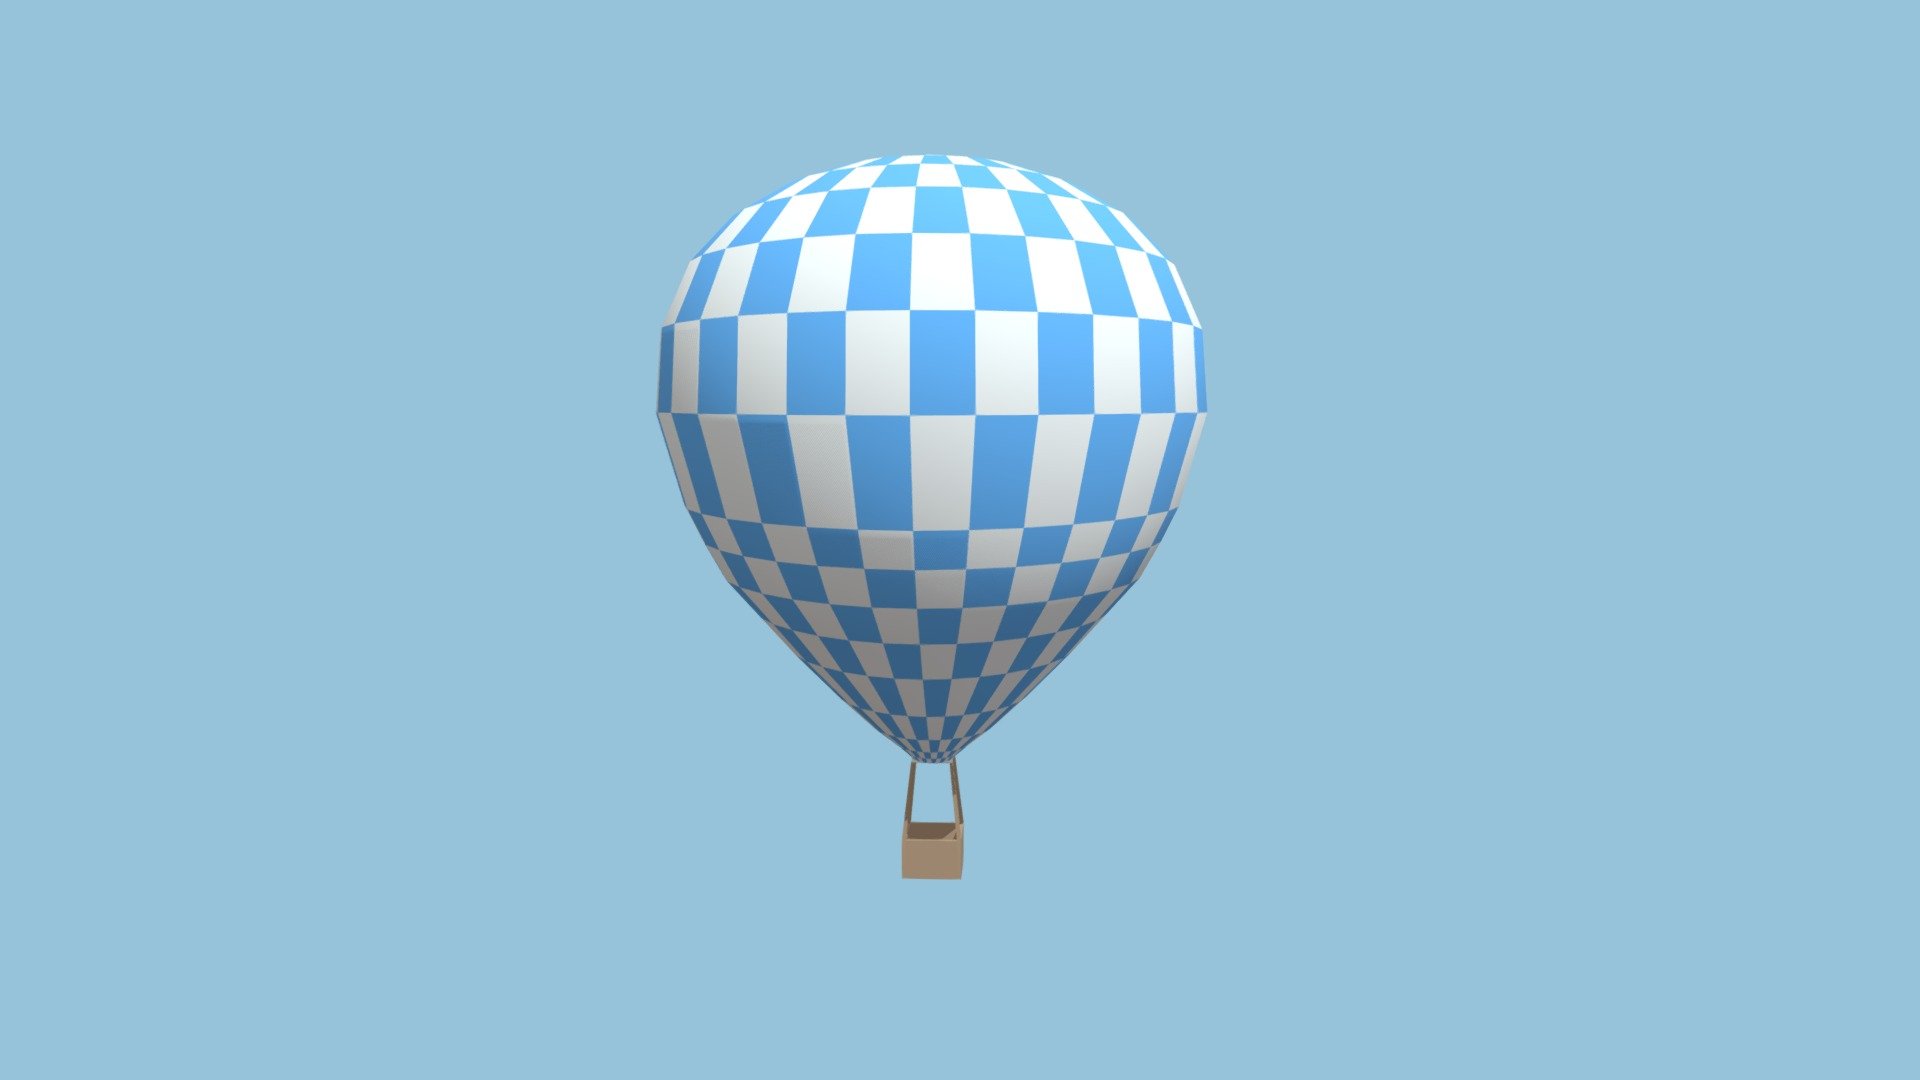 For Day 30 of Nodevember, I made a hot air balloon. I plan to maybe slap this in the far distance of one of my games, which is why it's actually not that detailed. It's on purpose this time. 

And seeing as this is the last model of Nodevember, I'm gonna take a much-needed break. I did not expect 3D modeling and uploading 30 models over the course of this month to be so hard for me, but apparently, it was. Frankly, I'm exhausted. My brain hurts. Coincidentally, this upload will also use my last Sketchfab upload credit for now 3d model